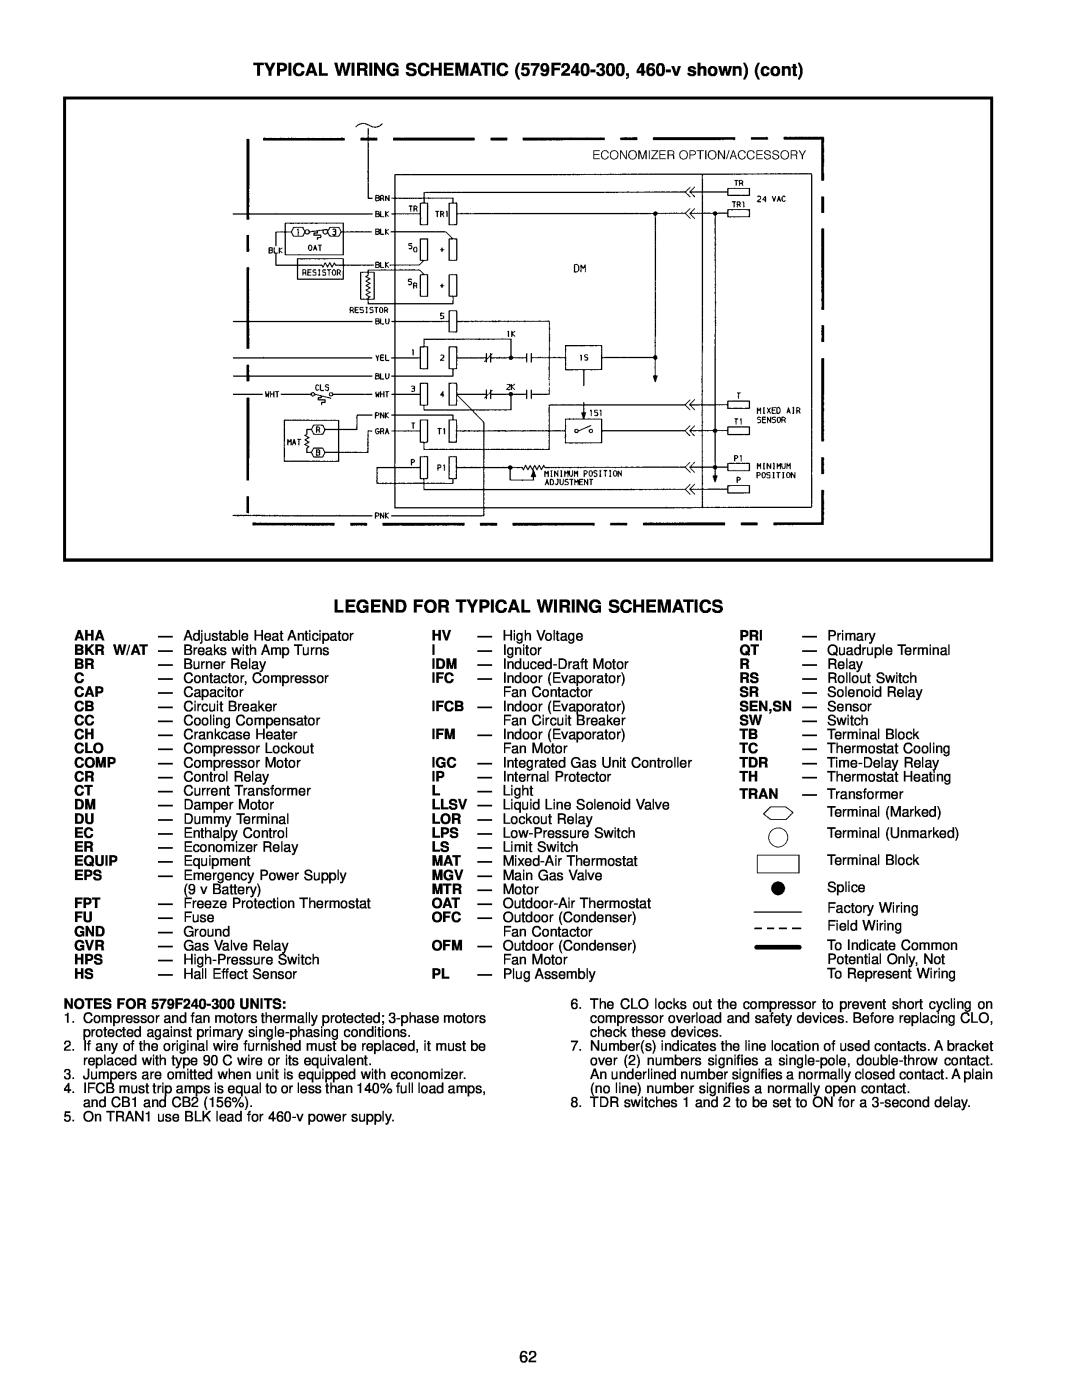 Bryant 580D manual Legend For Typical Wiring Schematics 